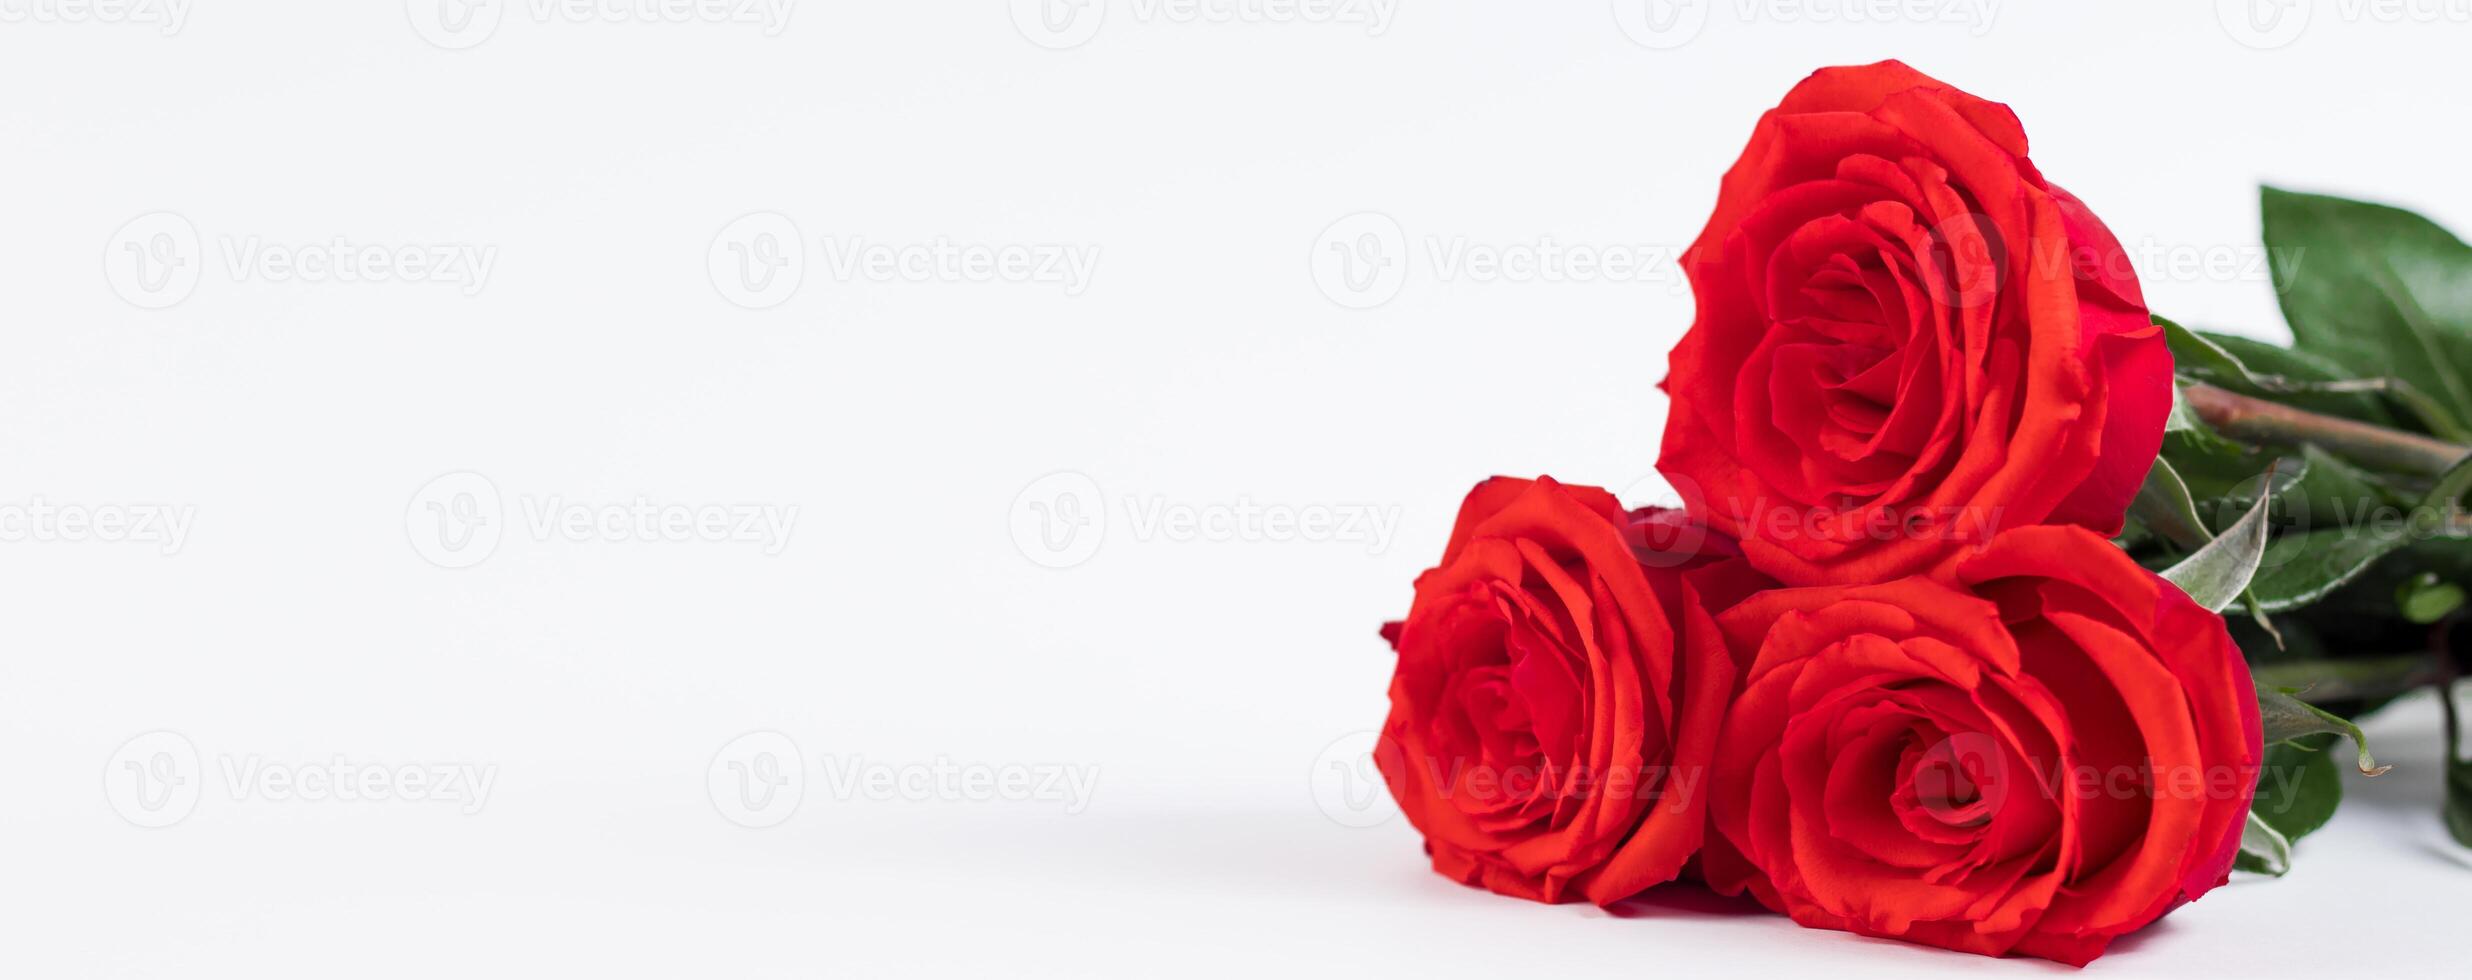 Bouquet of red roses and hearts on a white background. Valentine's day February 14. Place for your text. photo